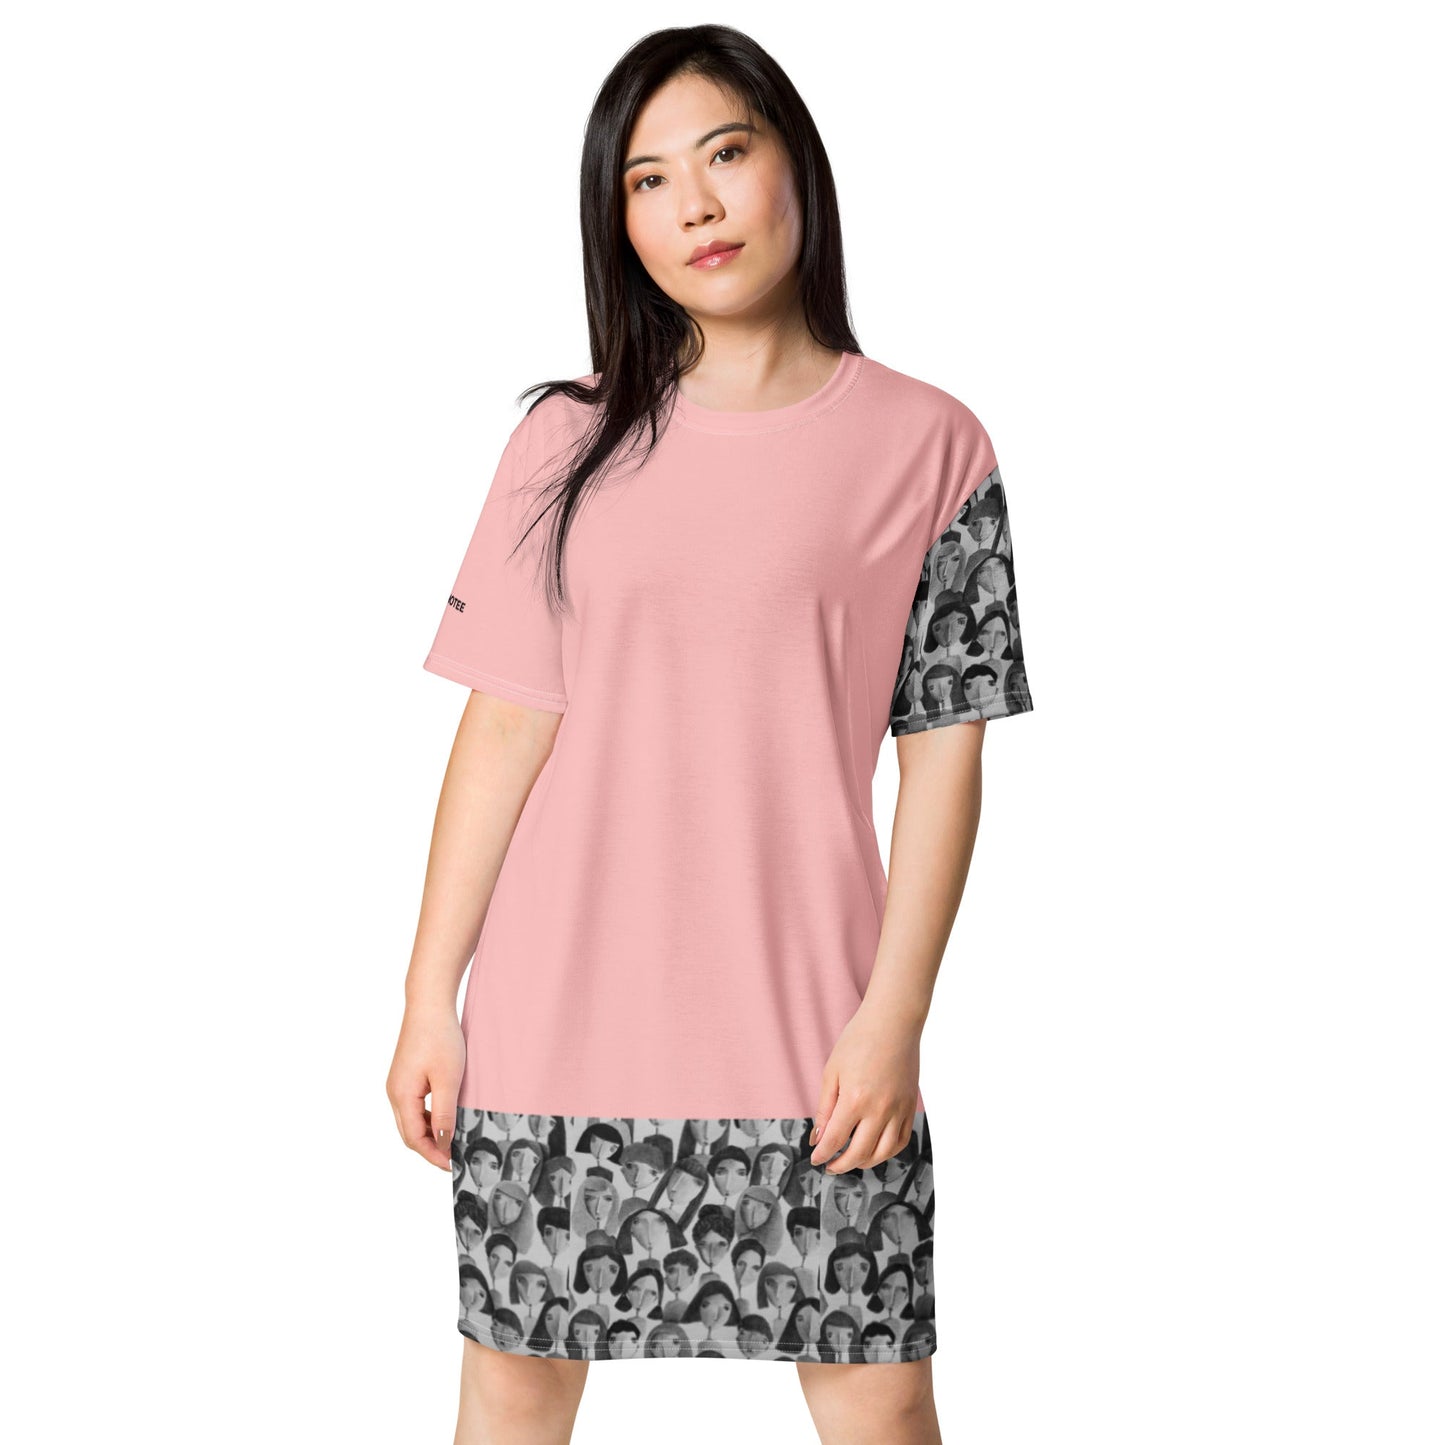 womens-tshirt-dress-different-faces-2-pink